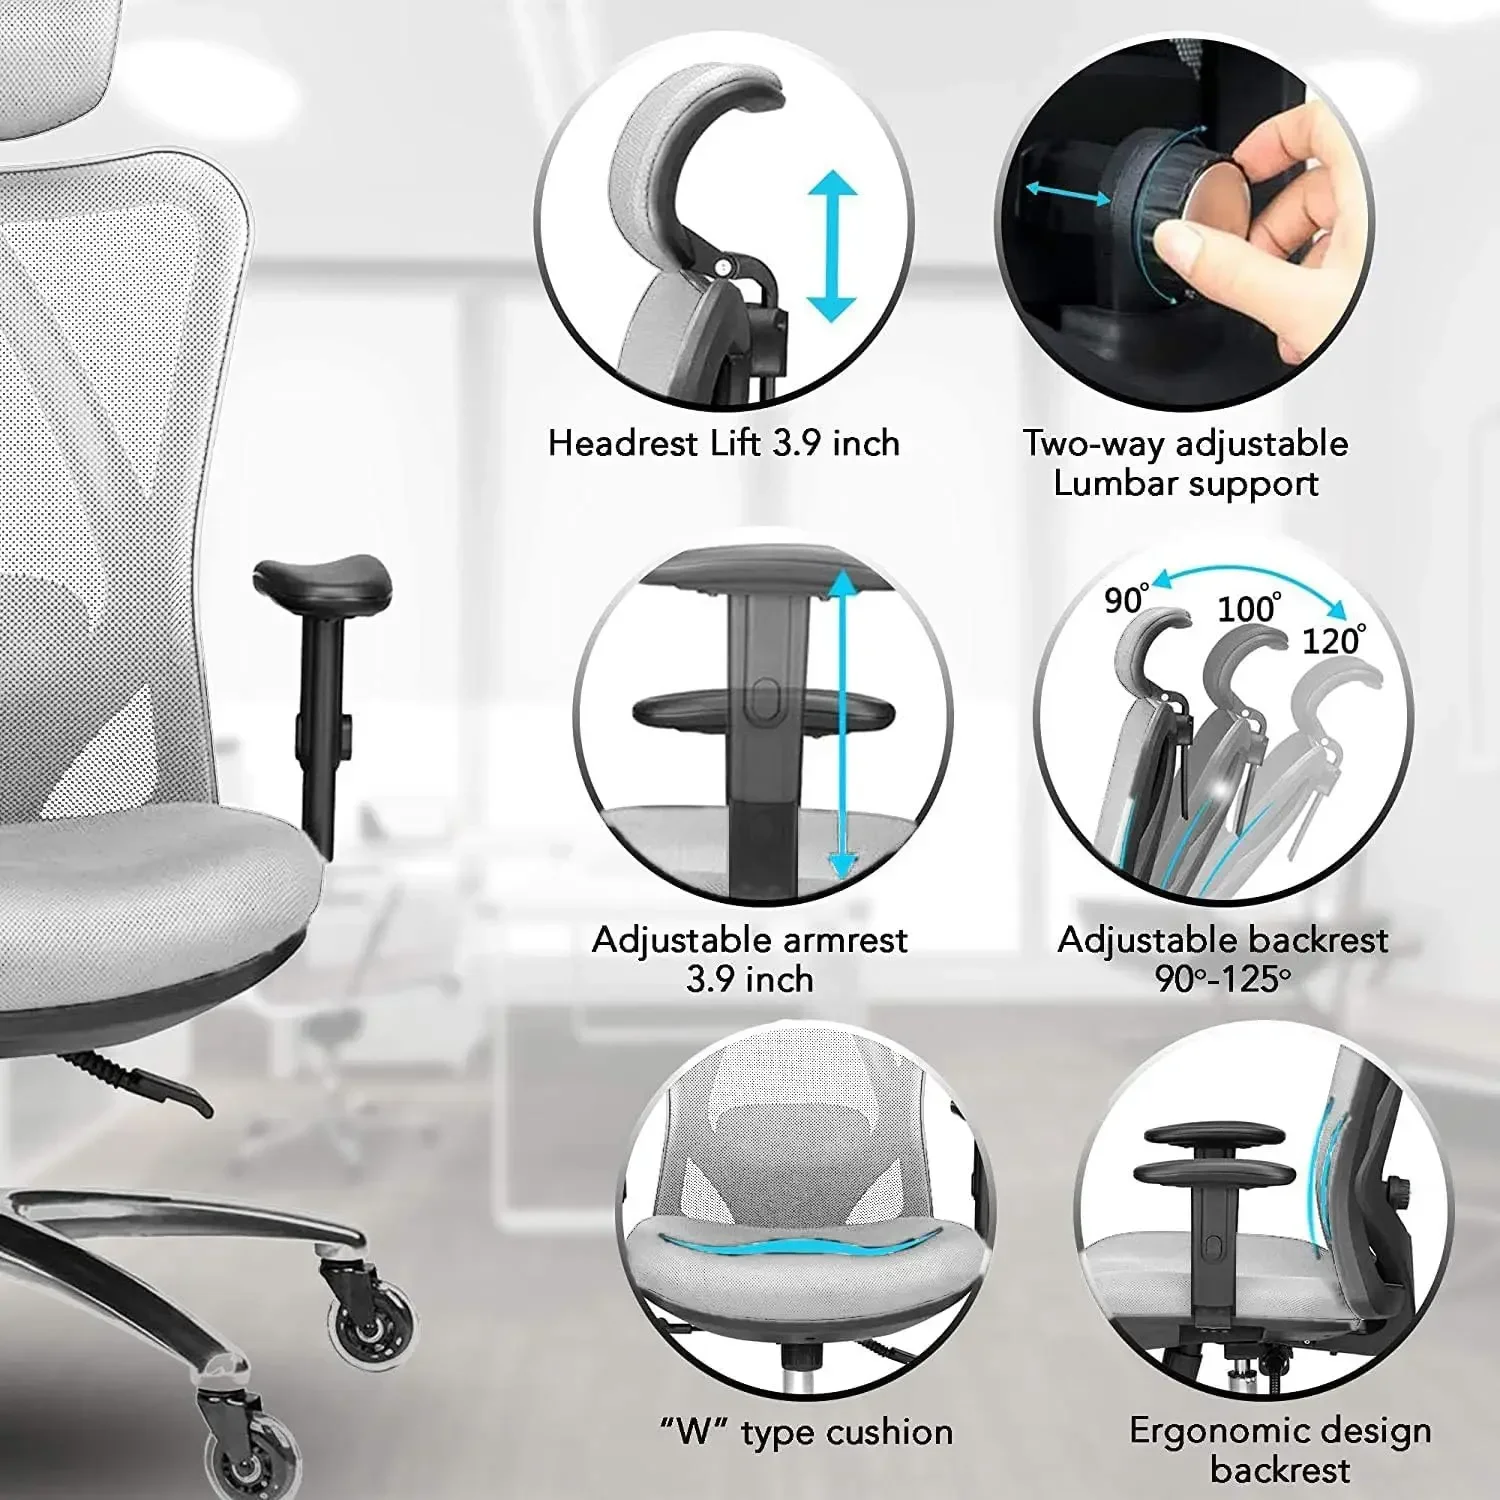 

Duramont Ergonomic Office Chair - Adjustable Desk Chair with Lumbar Support and Rollerblade Wheels - High Back Chairs with Breat